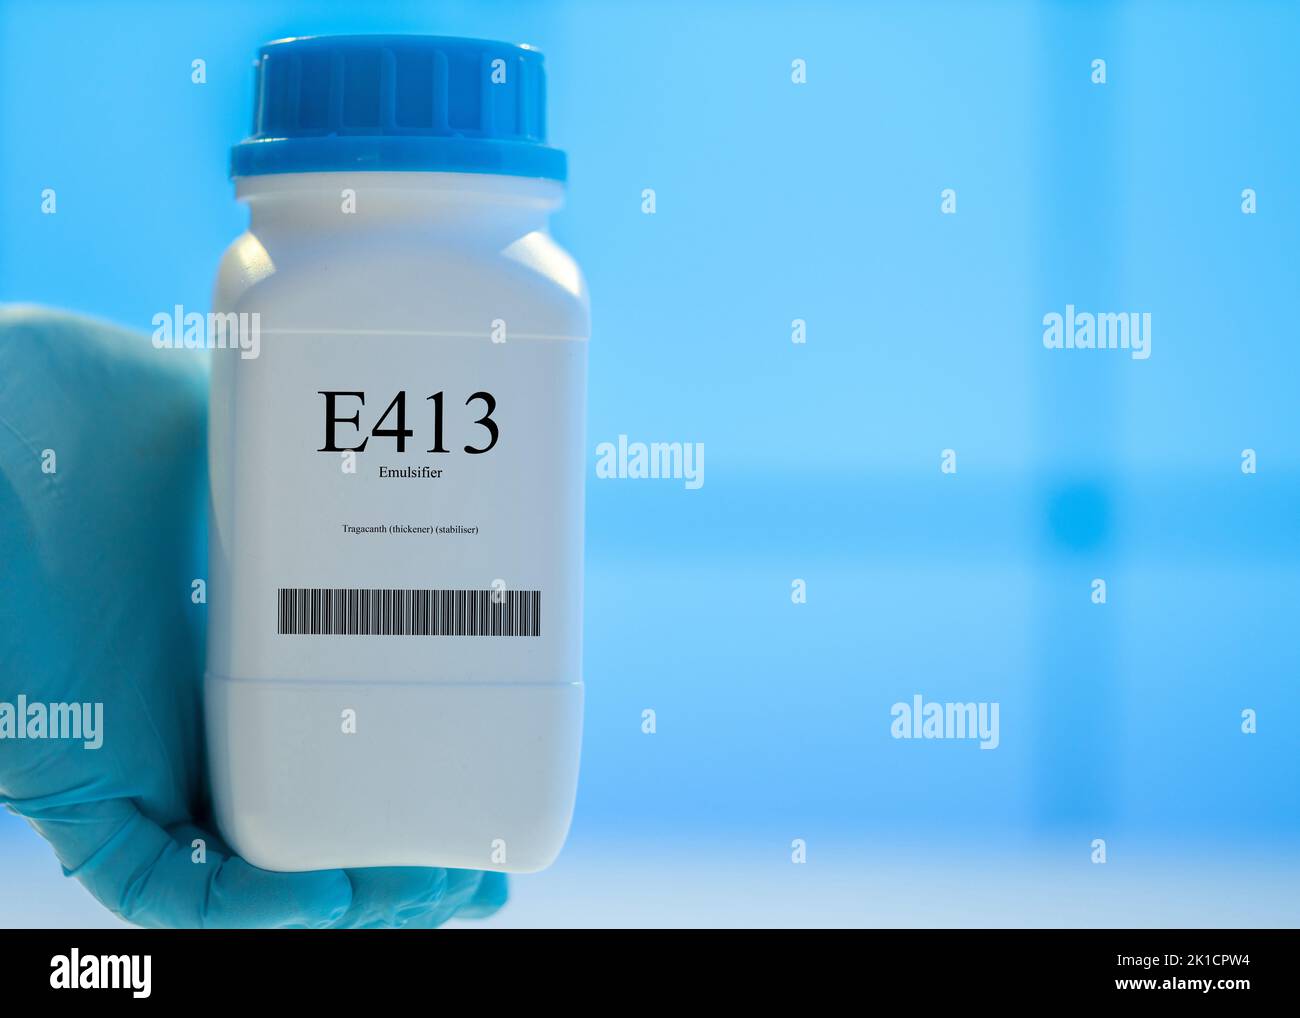 Packaging with nutritional supplements E413 emulsifier Stock Photo